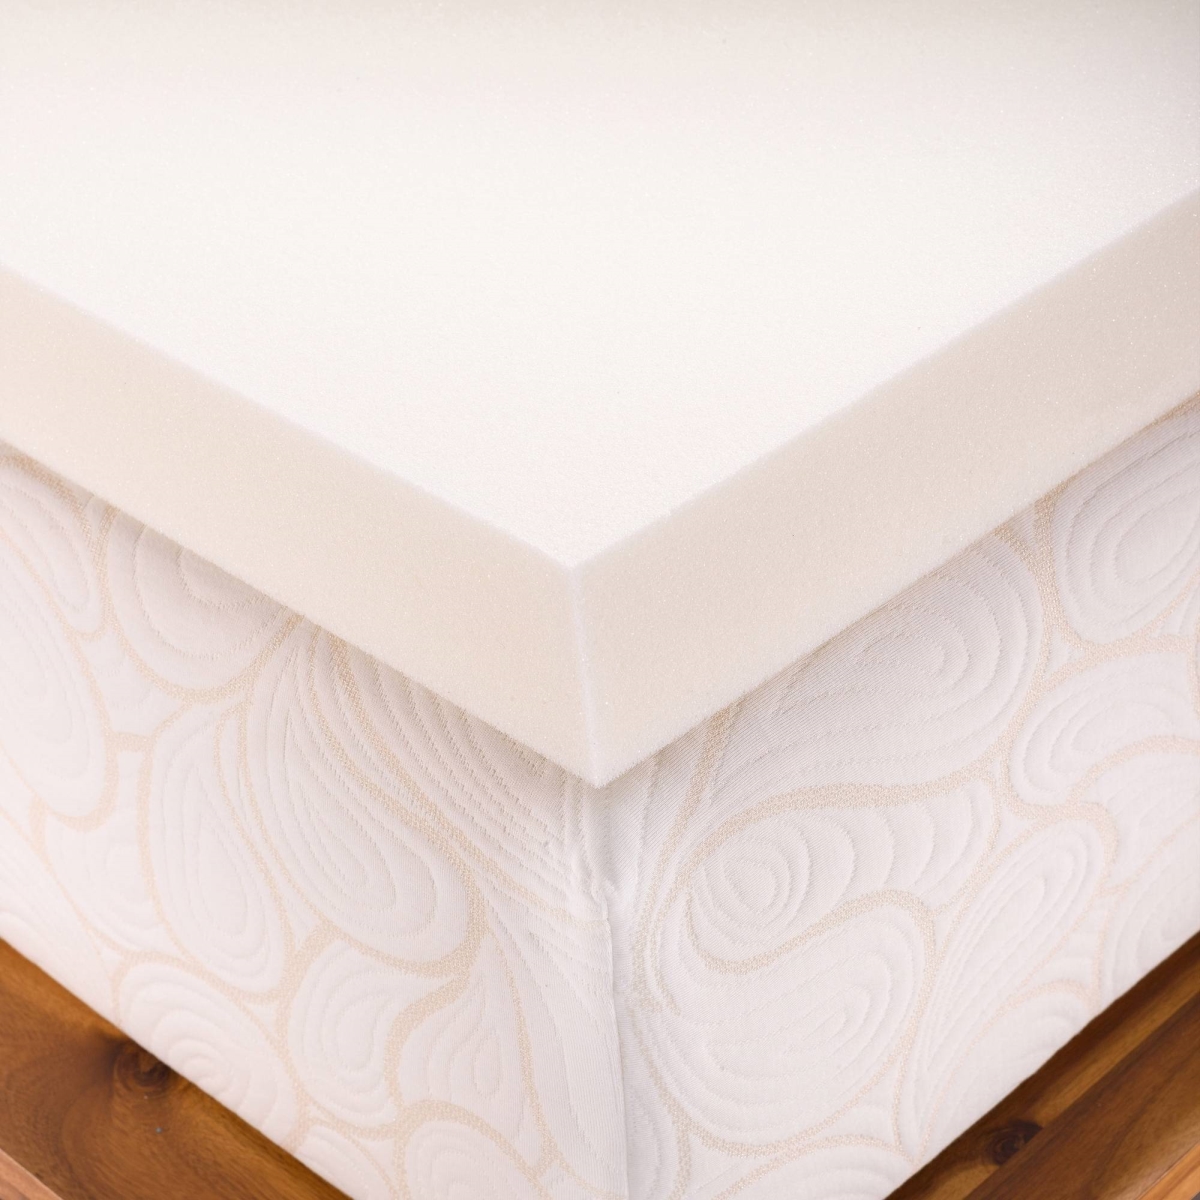 Full / Double Size 2 Inch Thick  Medium Firm Conventional Polyurethane Foam Mattress Pad Bed Topper Made in the USA - Memory Foam Solutions UBSPUMF2802